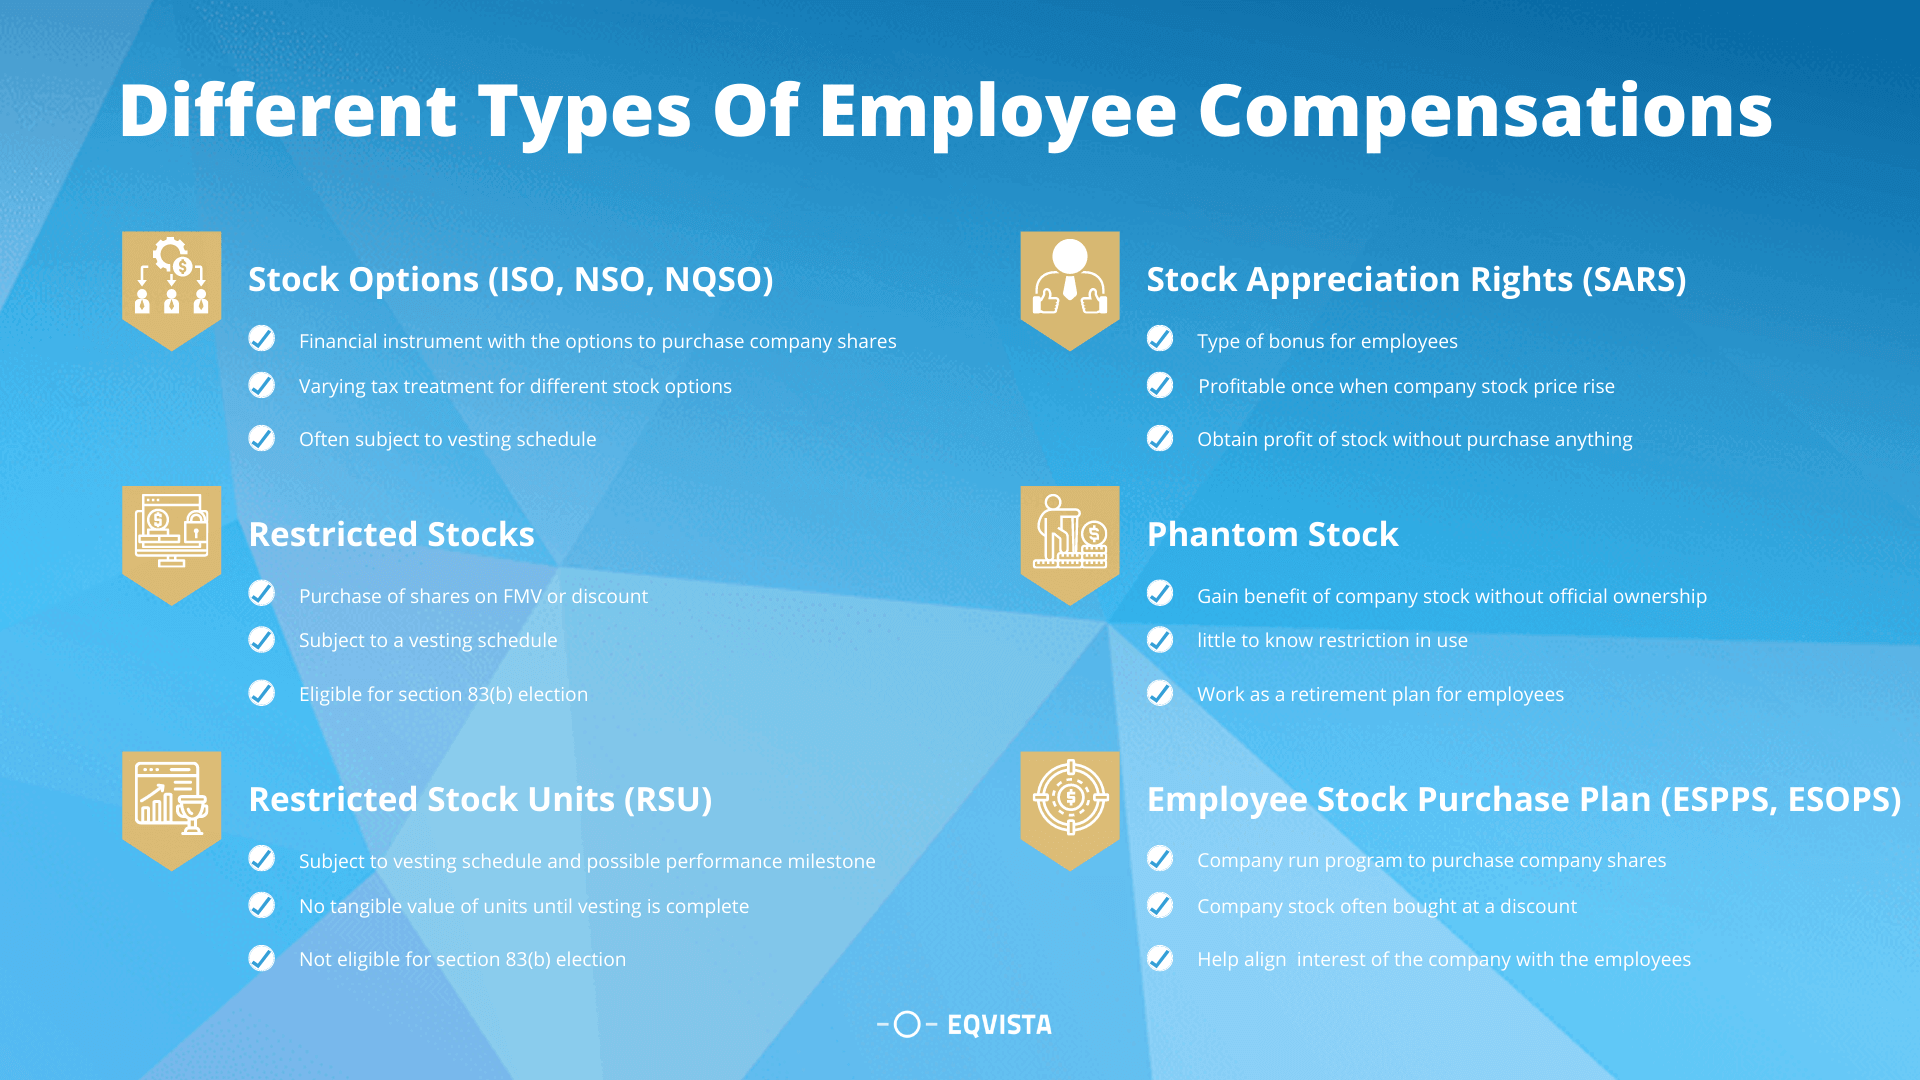 Different Types Of Employee Compensations